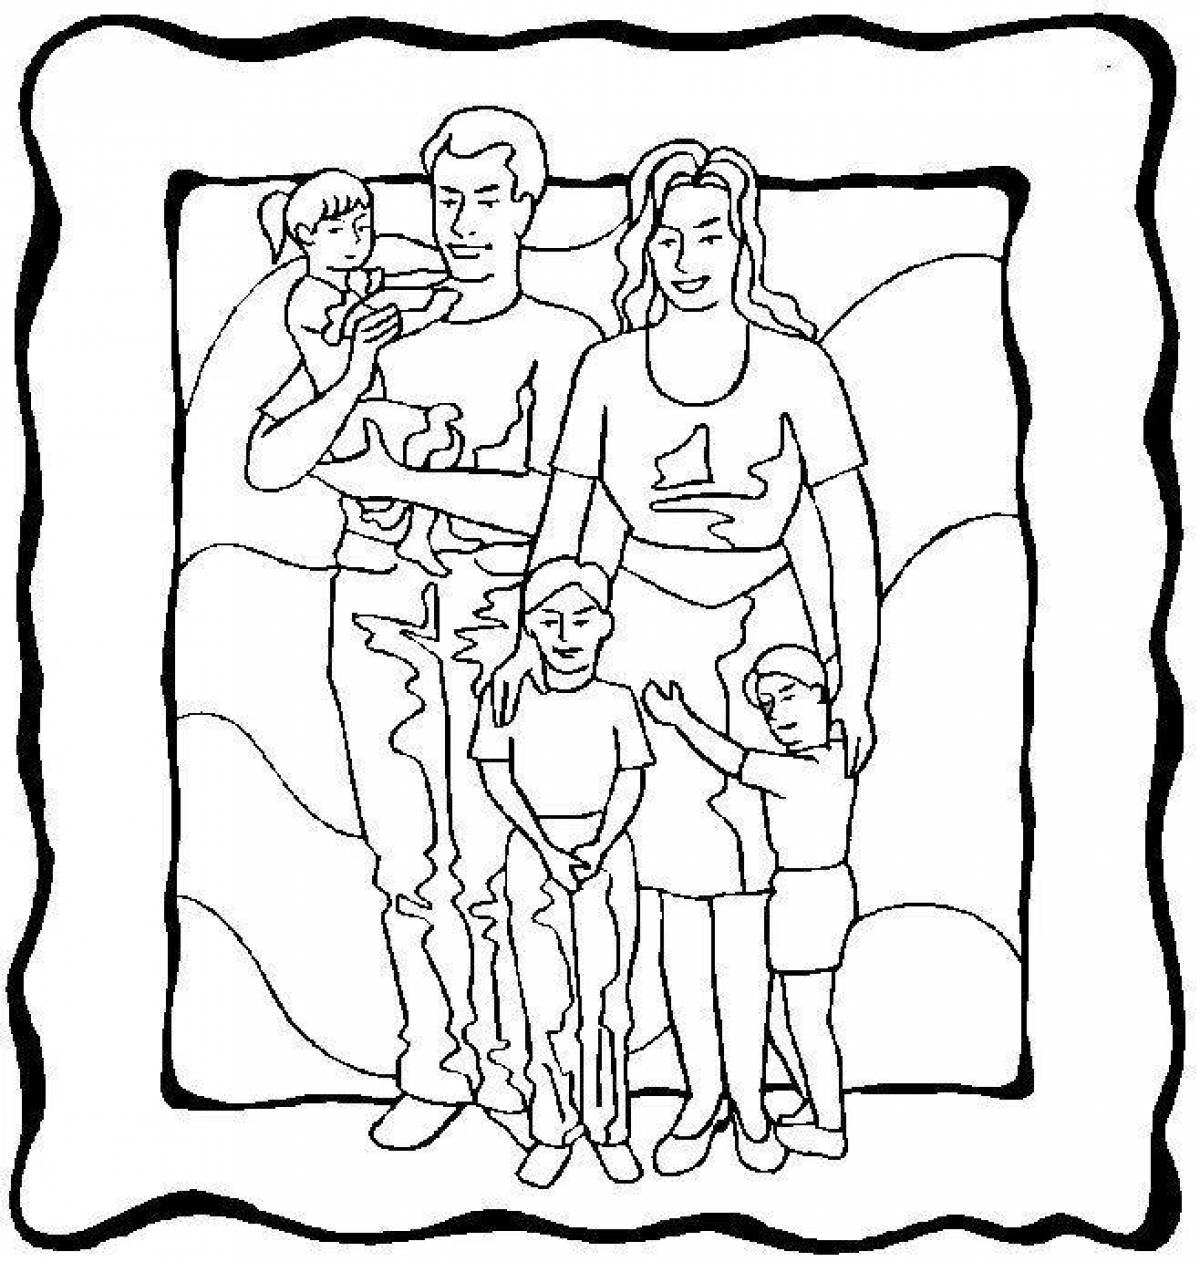 Coloring page content family of 4